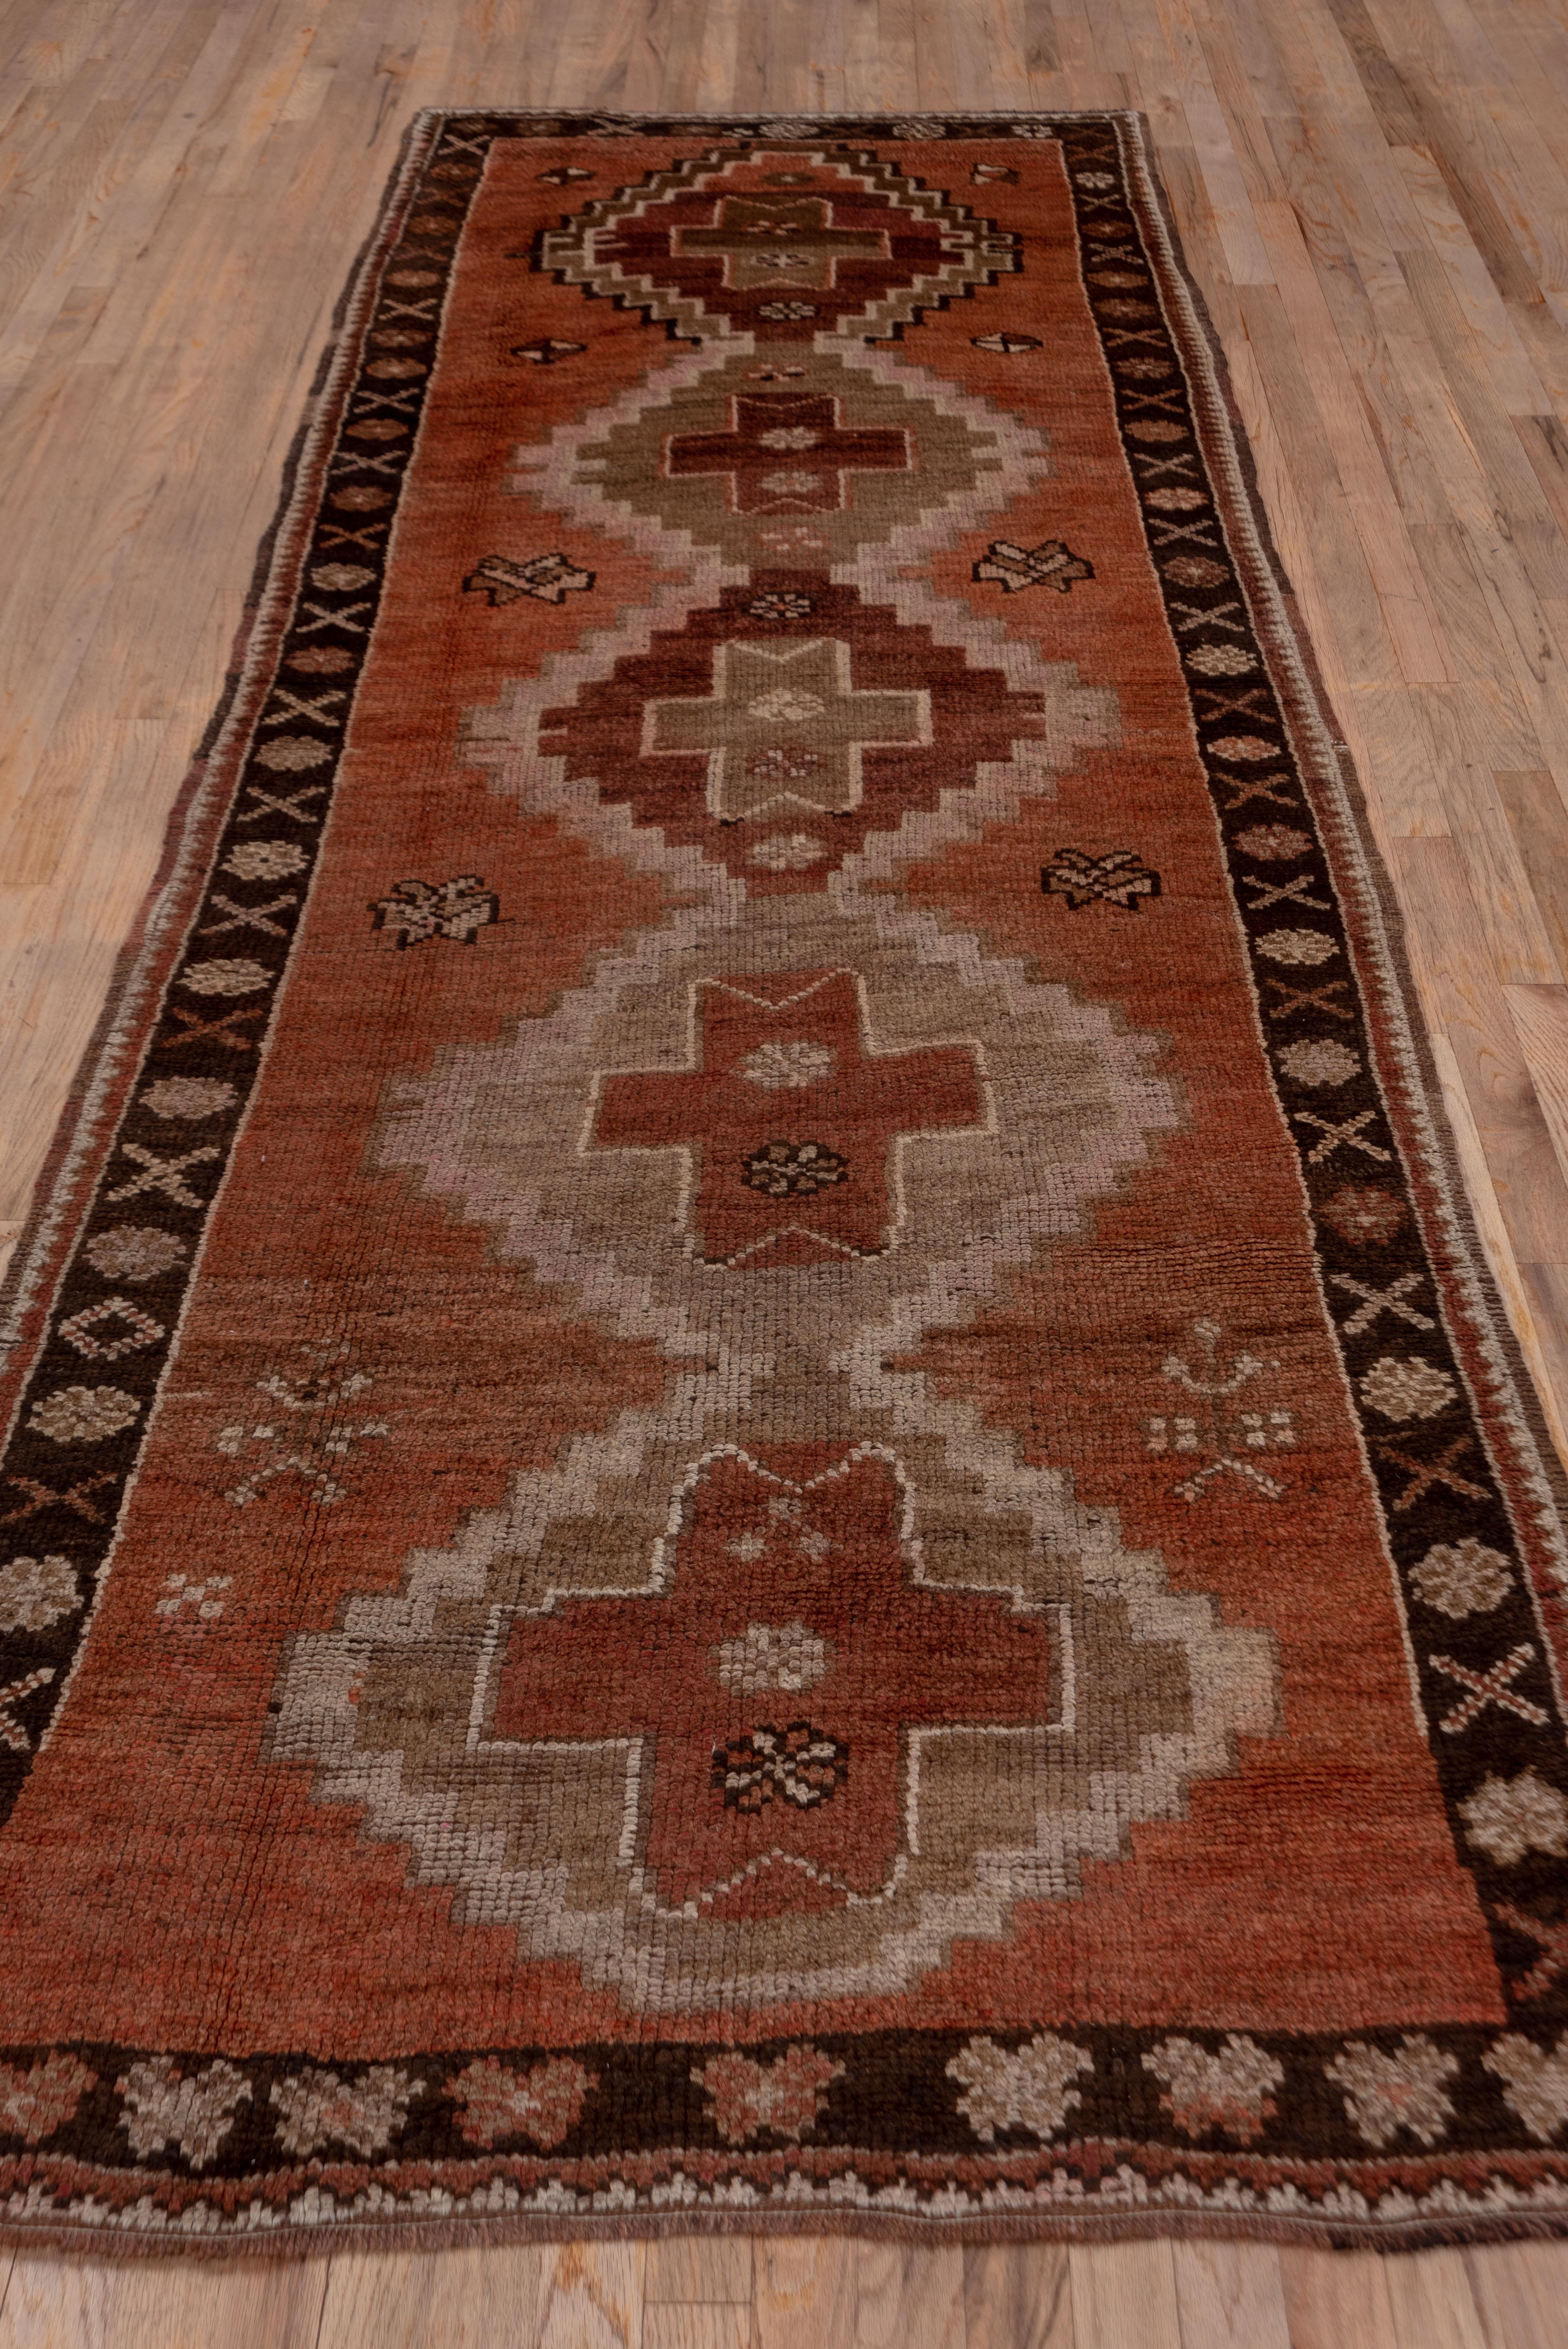 The coral red field of this Northeast Turkish rustic long rug displays five stepped medallions in red, pale green and light coral.